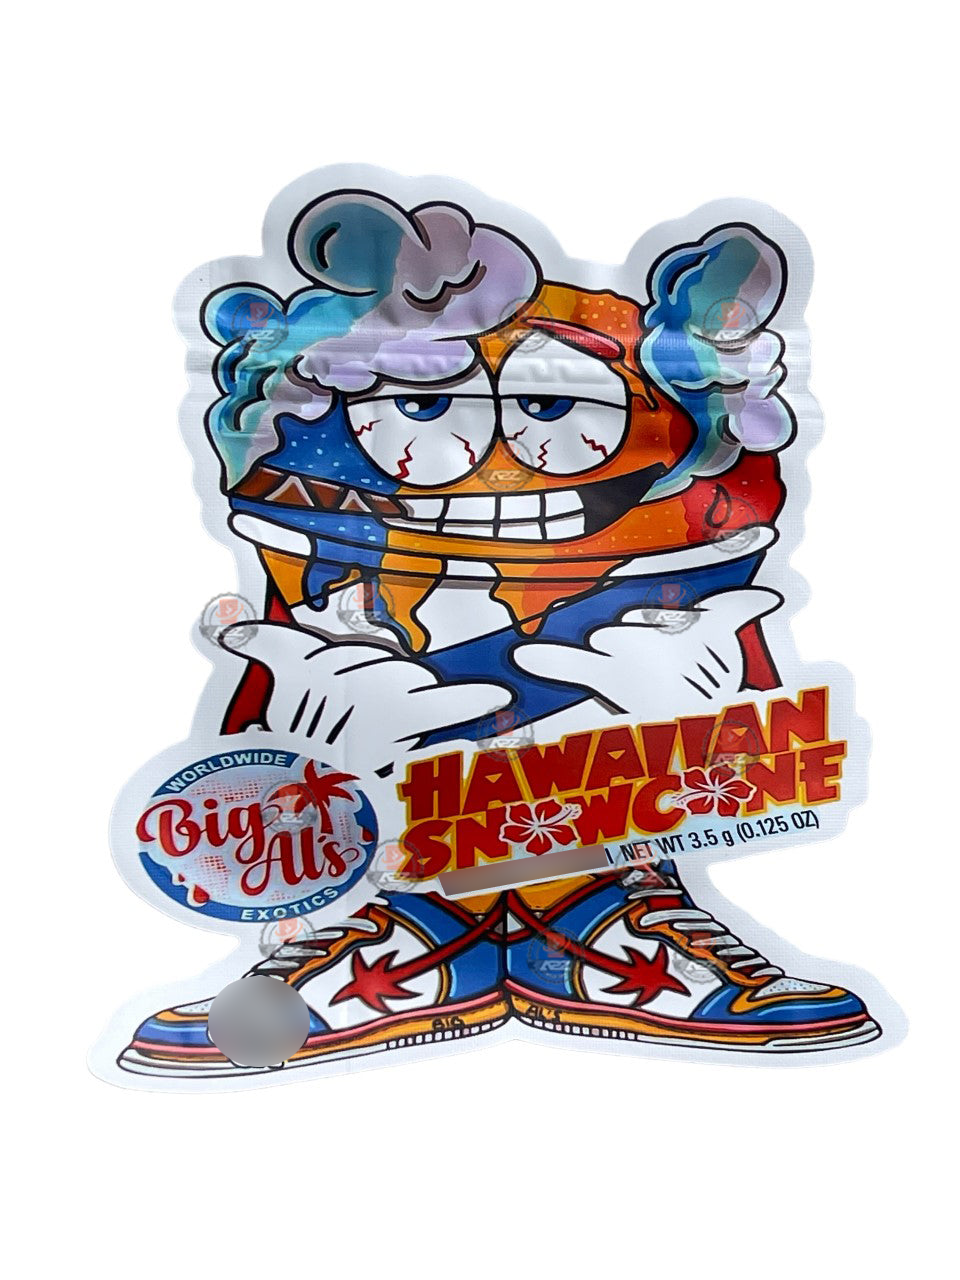 Hawaiian Snow cone Mylar bags 3.5g cut out Big Als - Packaging Only